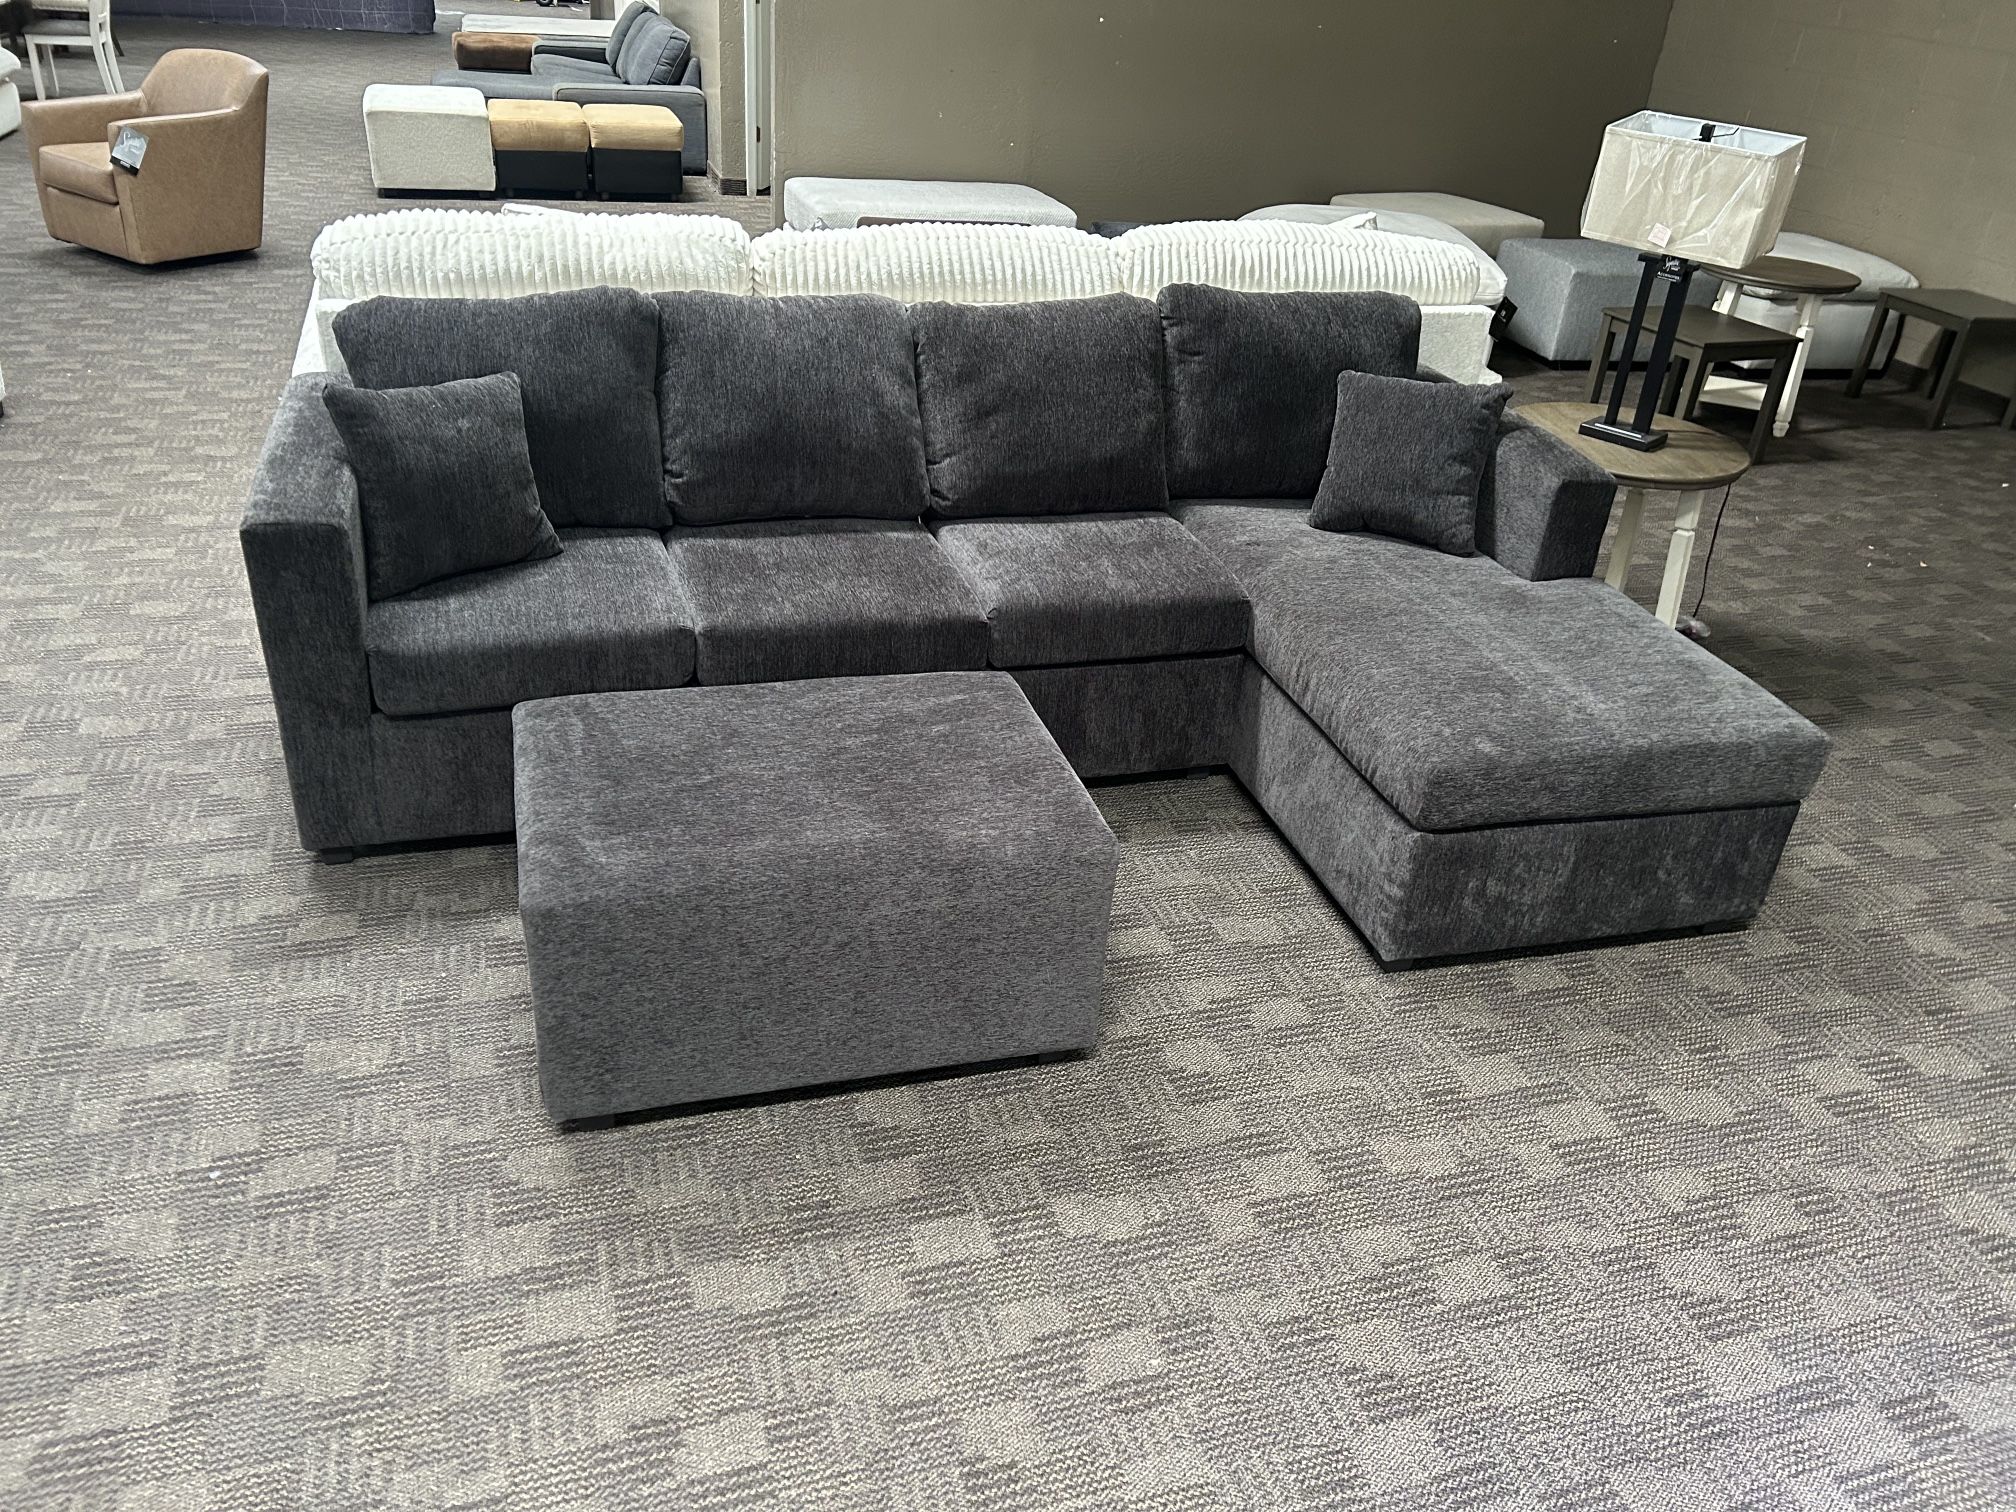 NEW Grey Black SECTIONAL